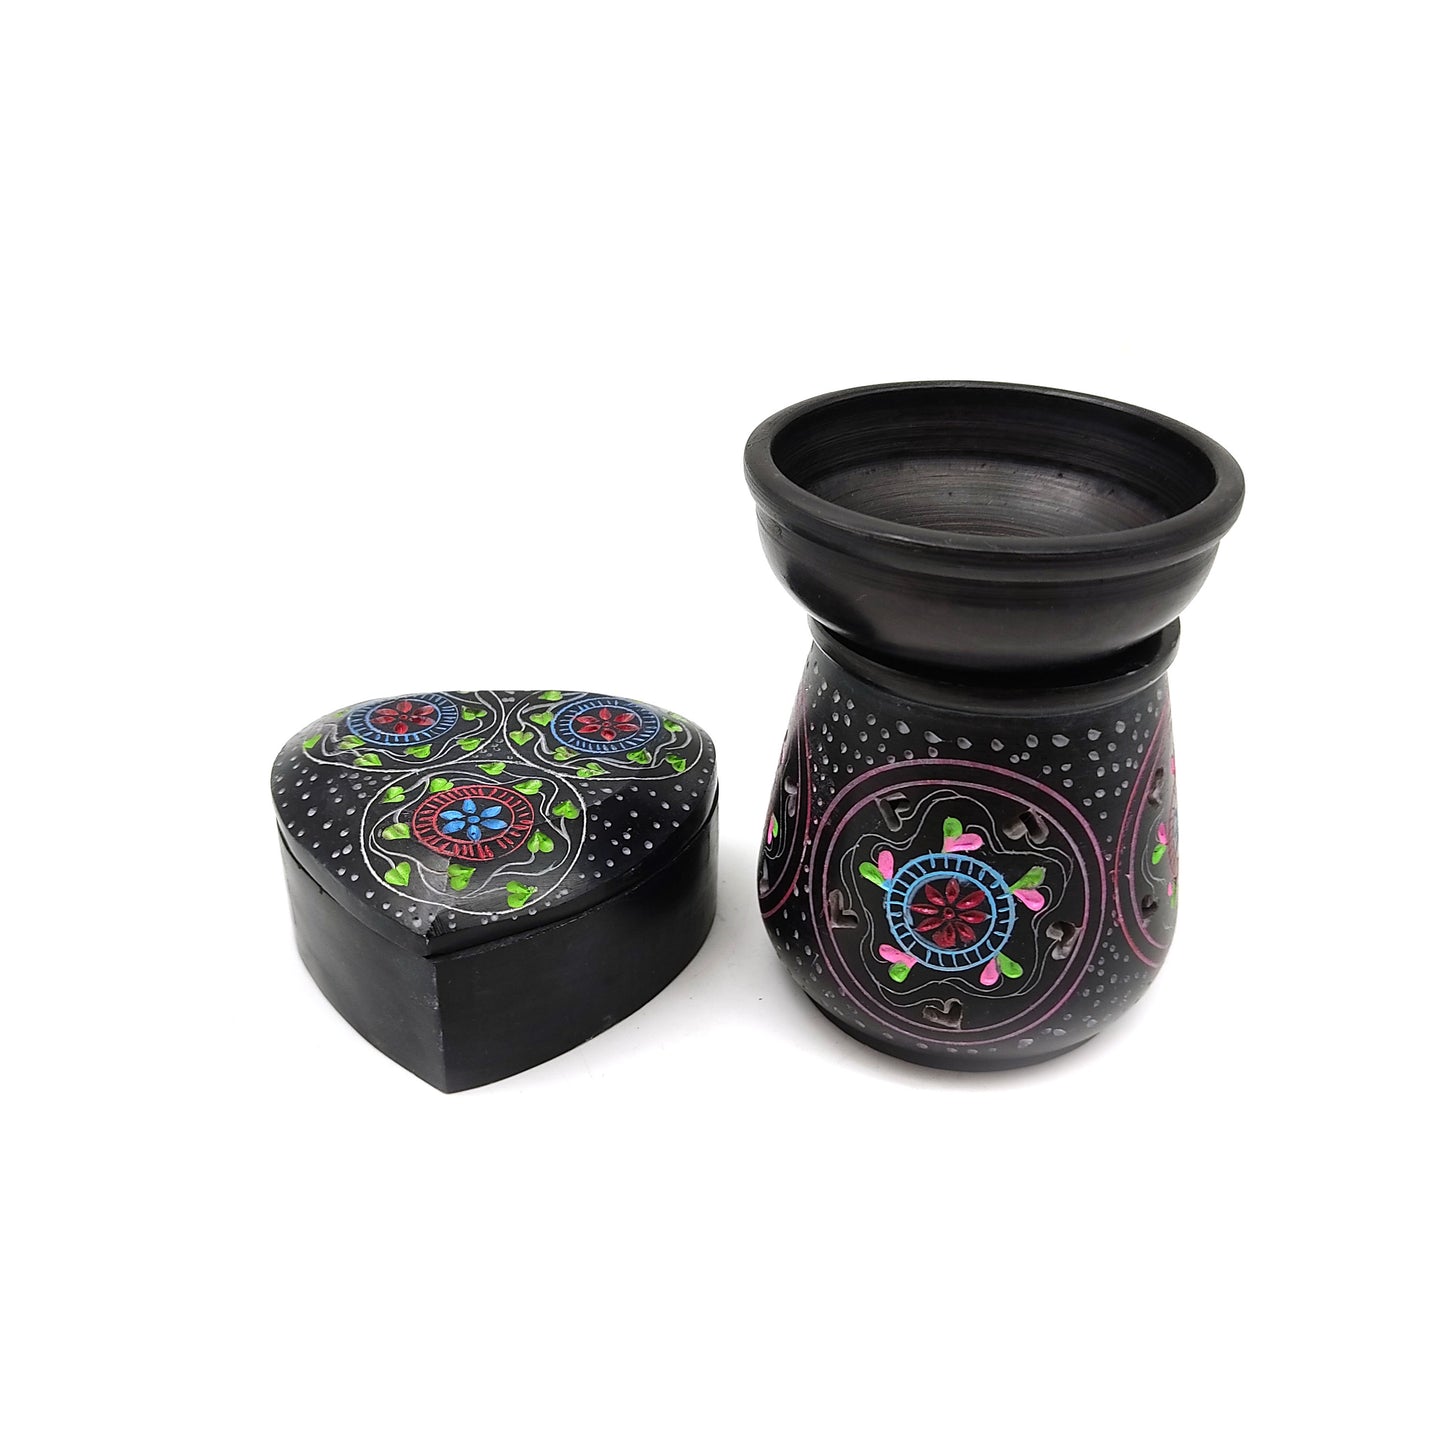 Soapstone Colorful Heart Design Gift Set Oil Diffuser Burner and Heart Shaped Box